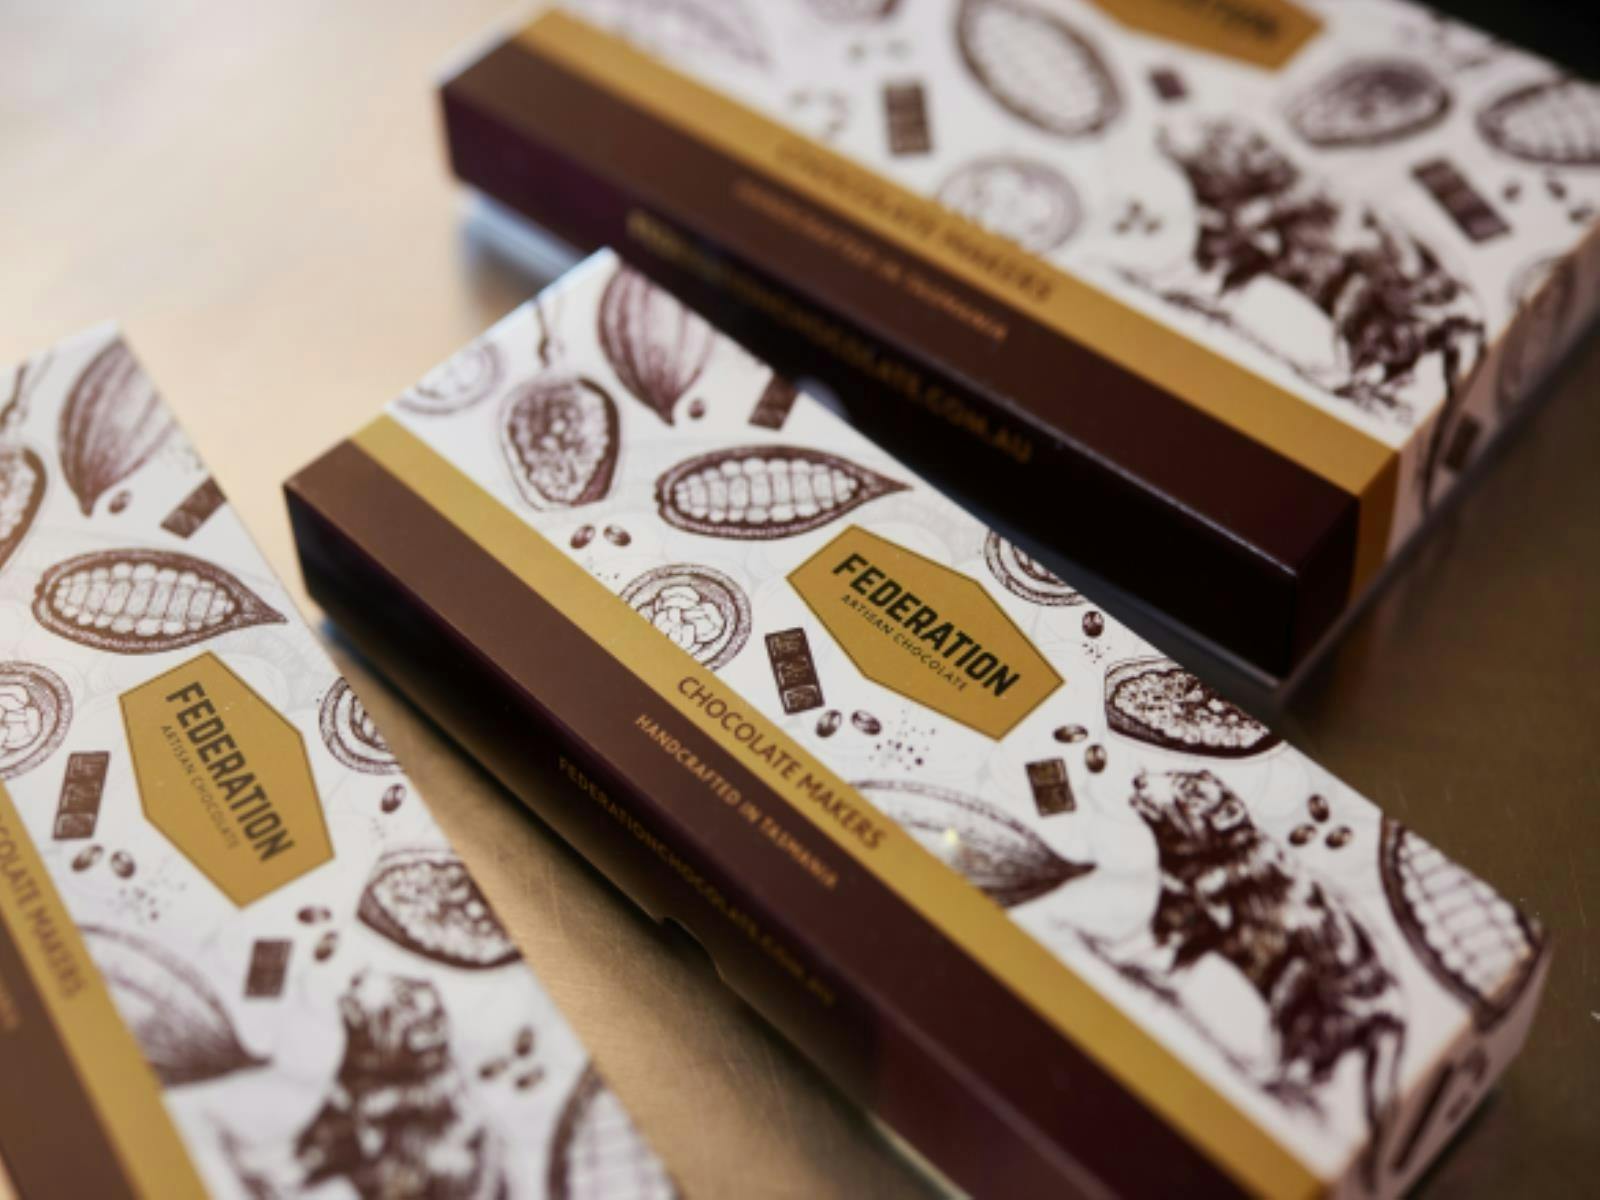 Chocolate Boxes from Federation Chocolate